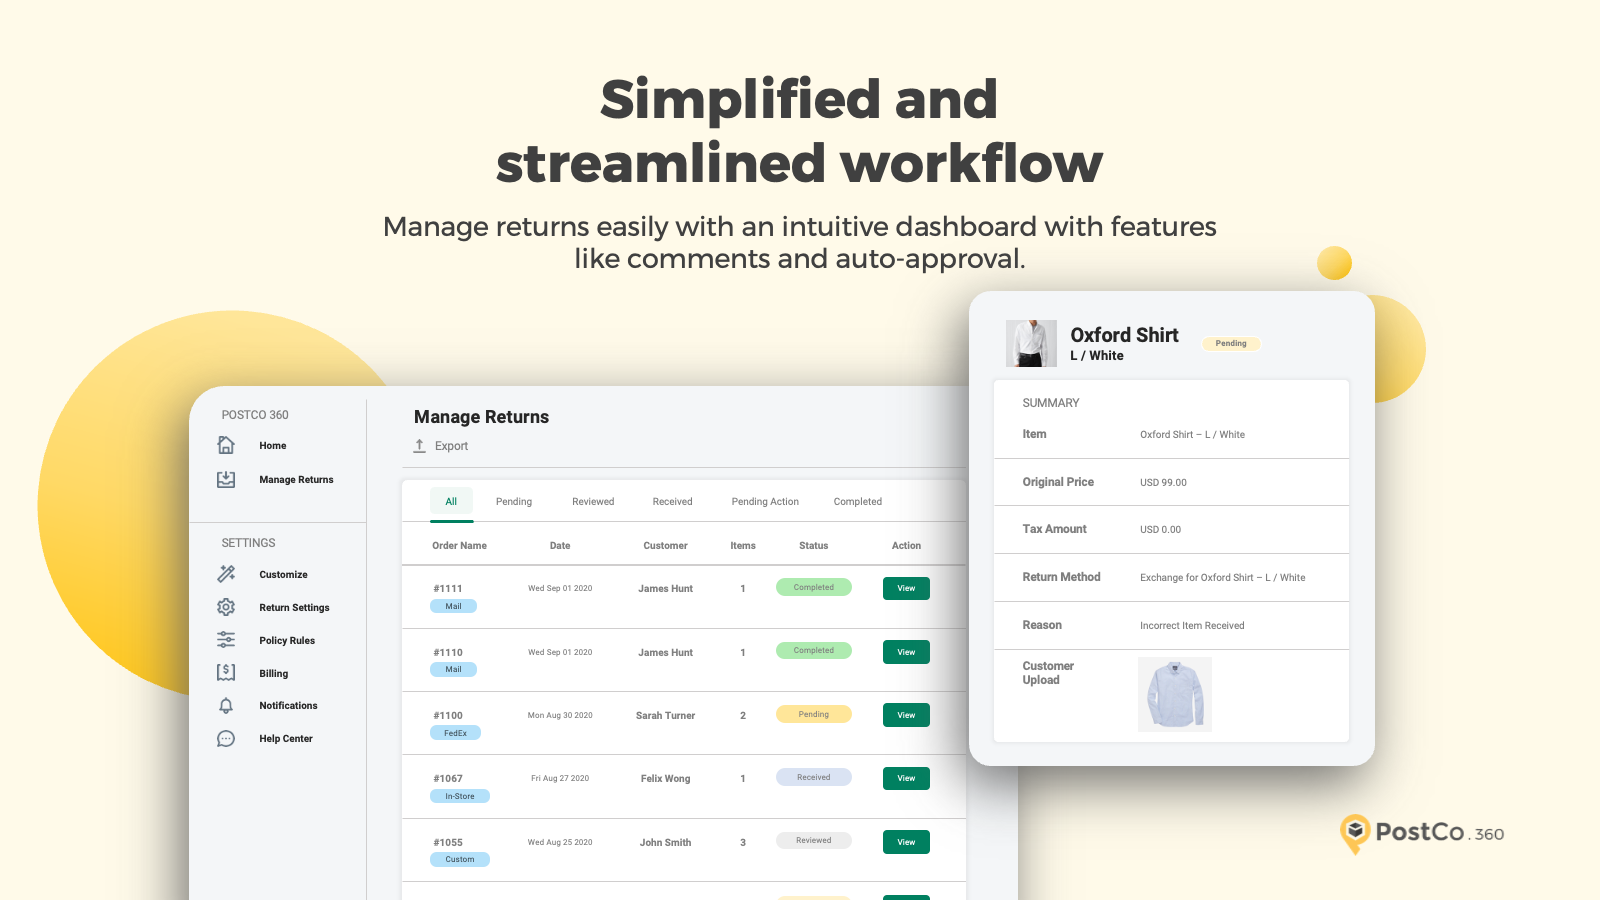 Simplified and streamlined workflow